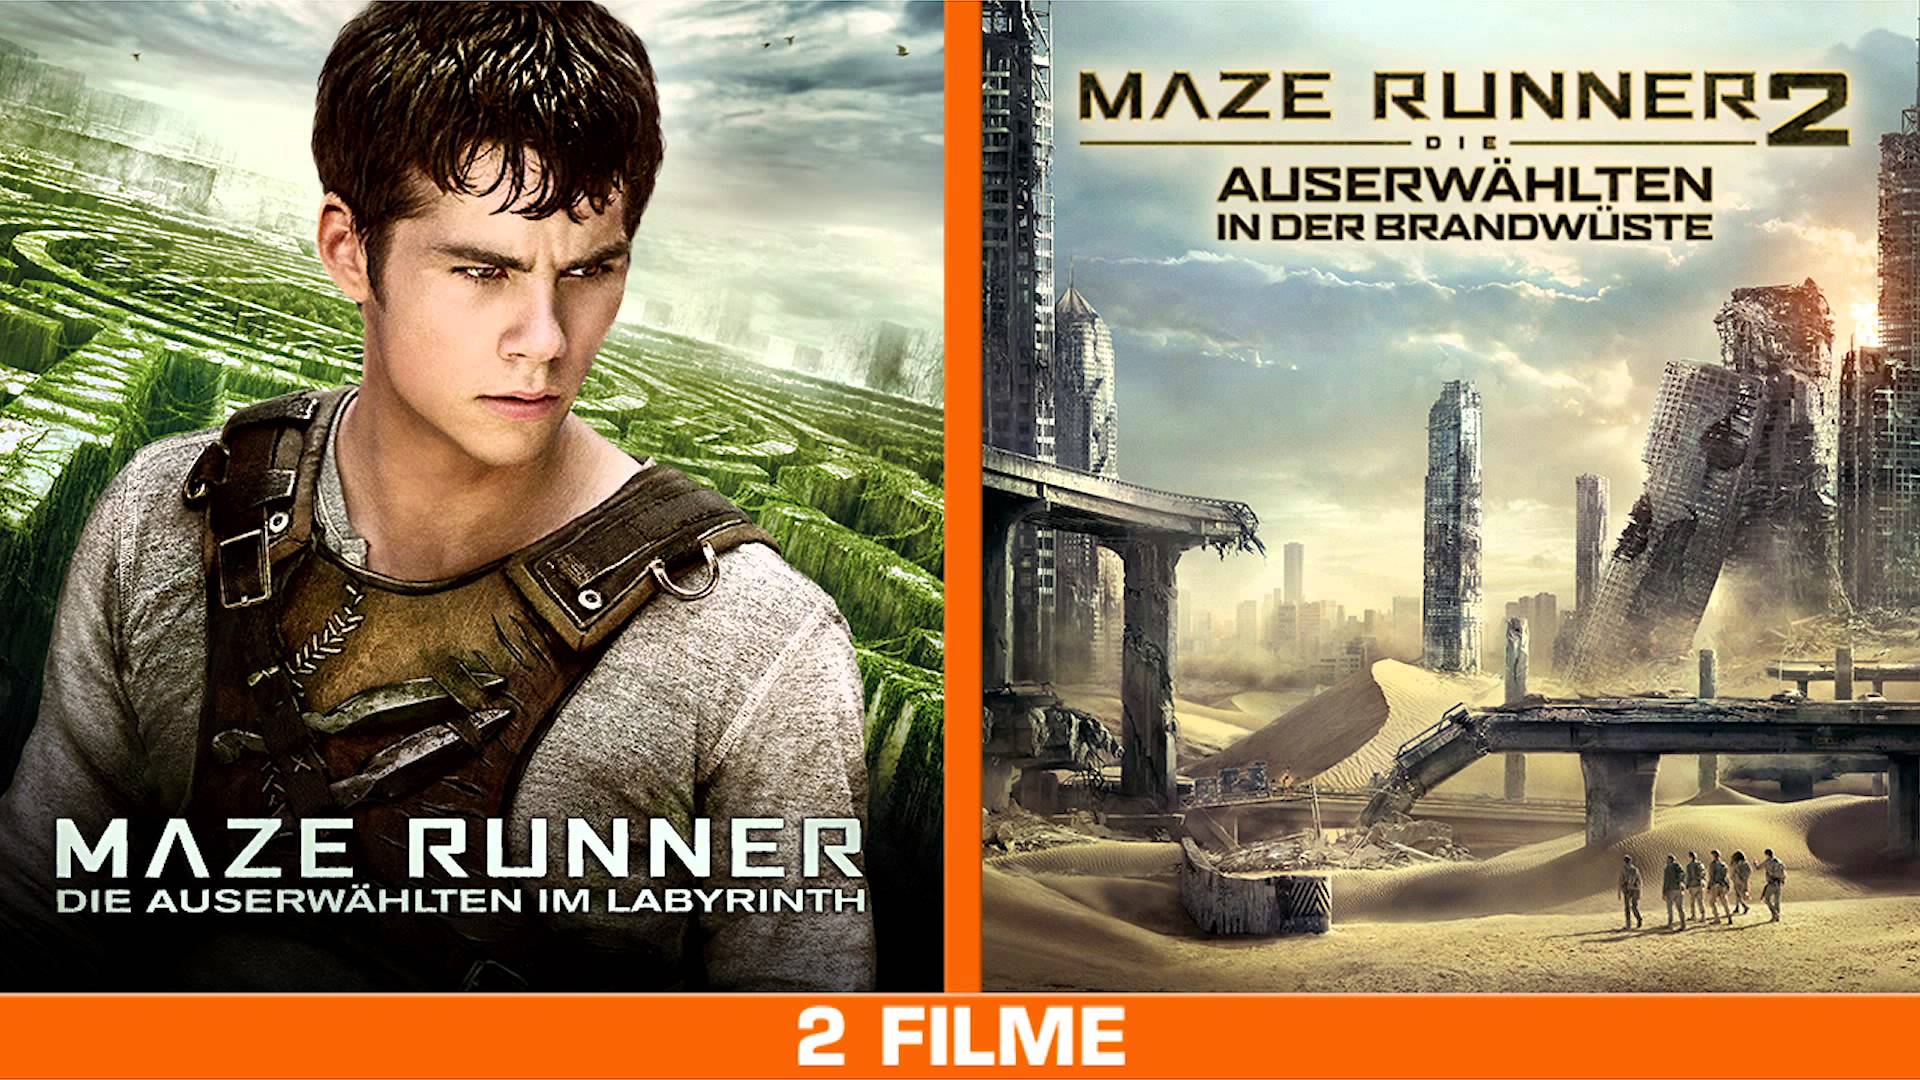 Maze Runner: the Scorch Trials - Movies on Google Play